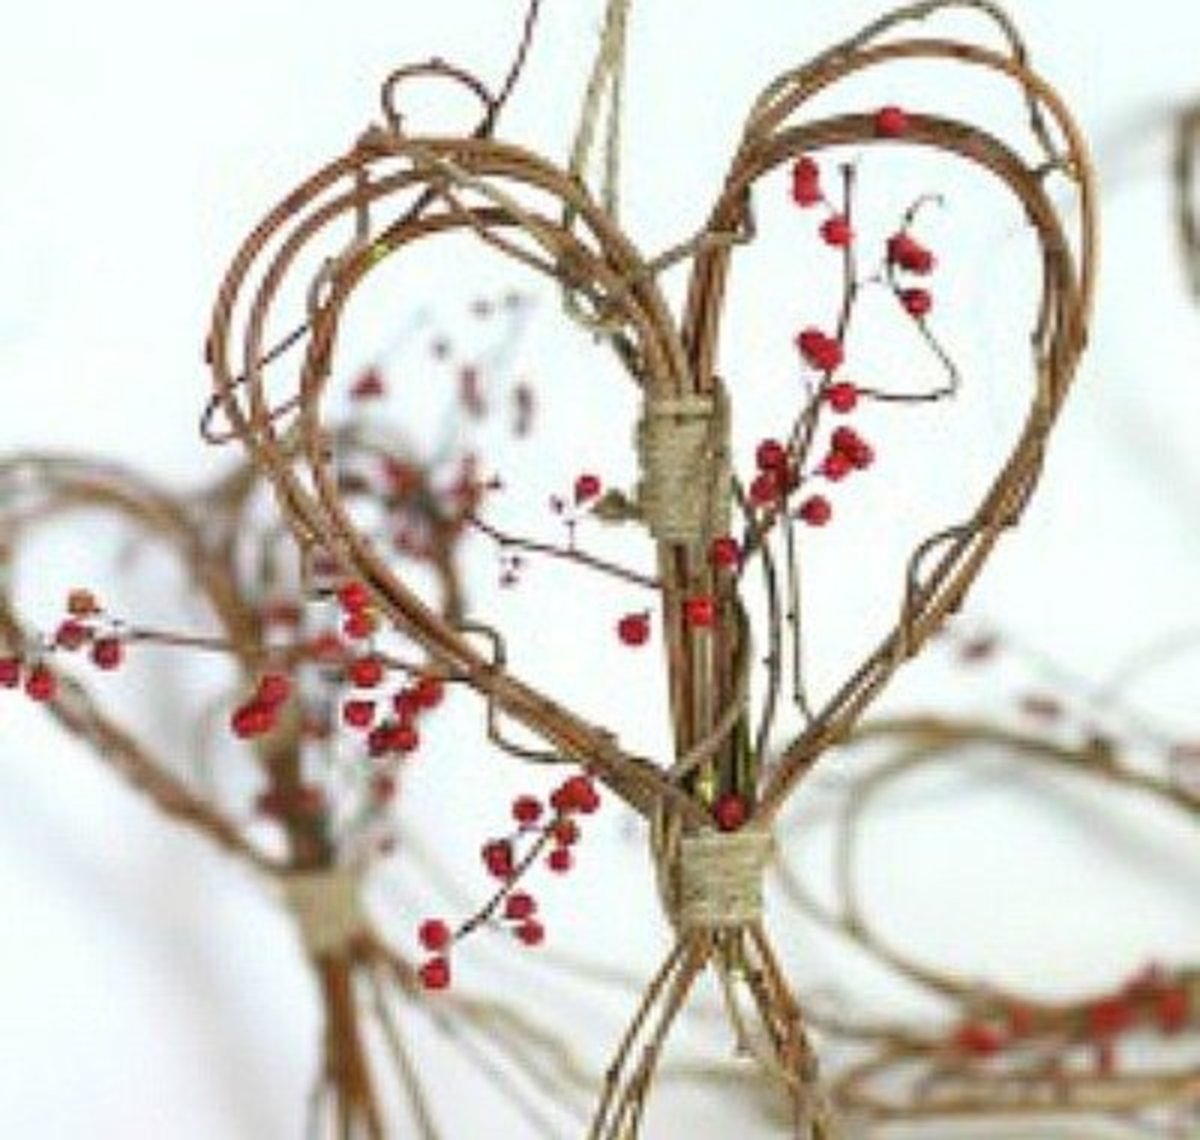 twig-crafts-projects